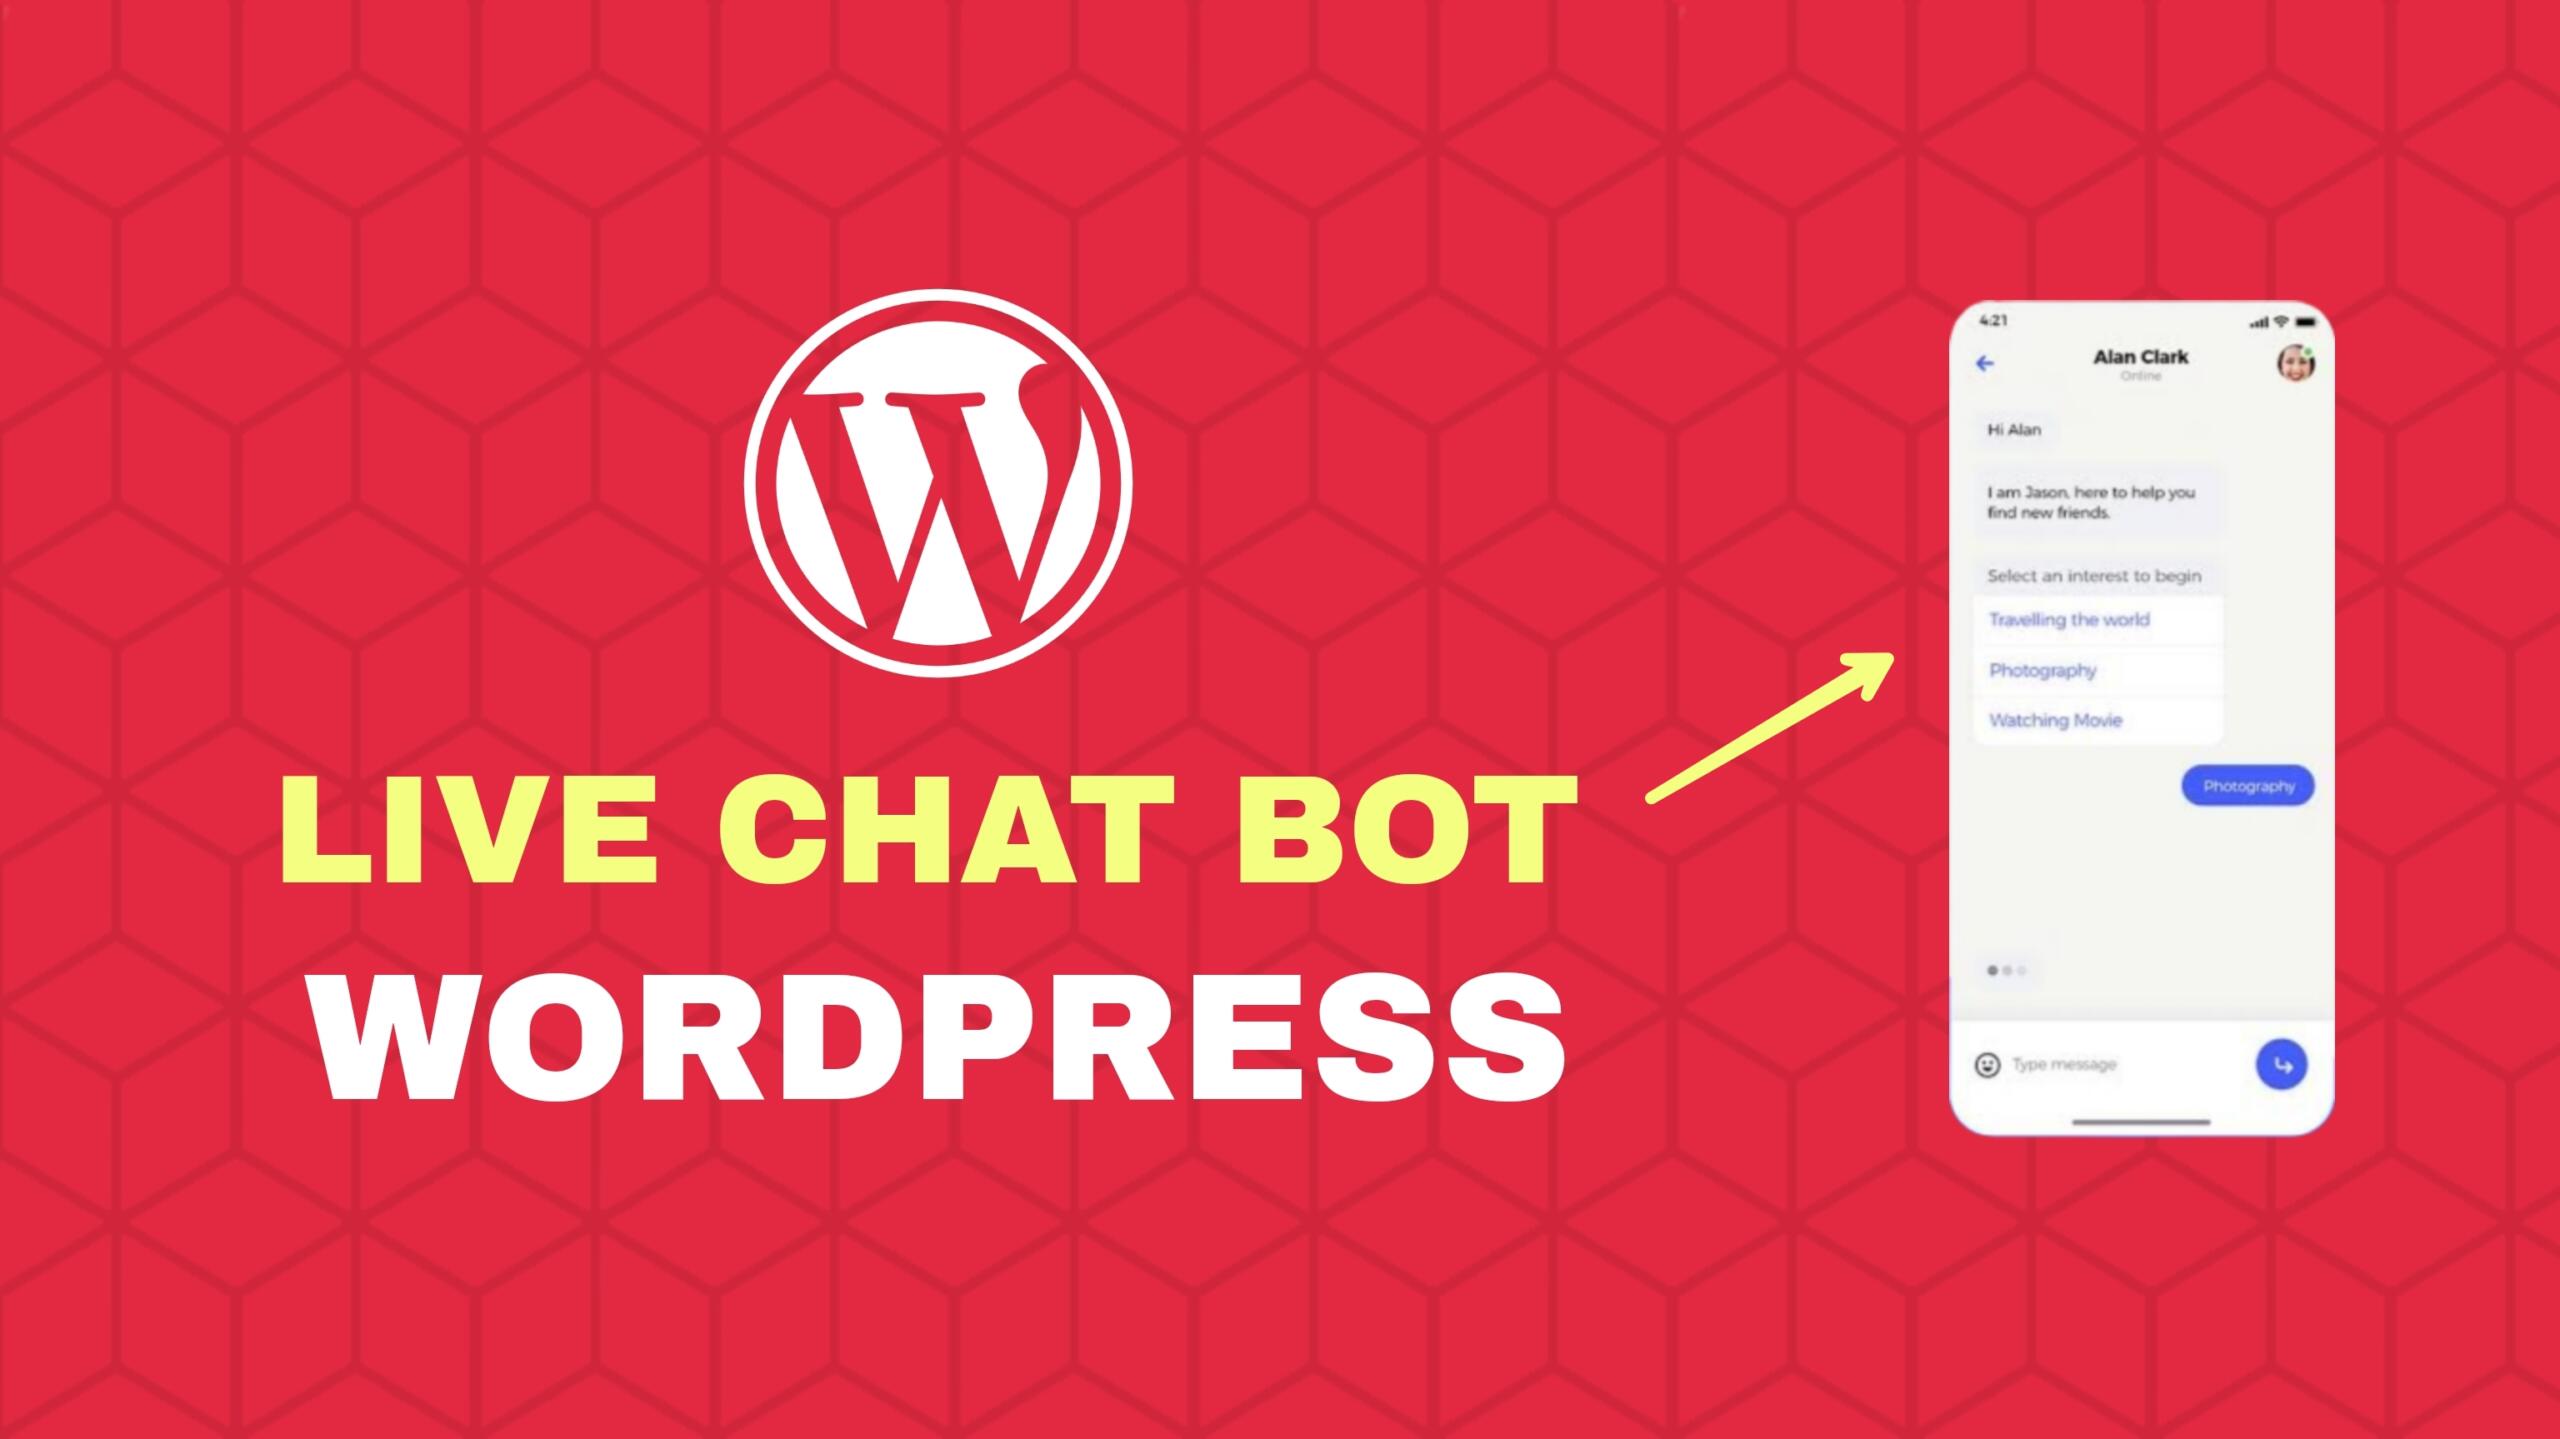 How to add a Live Chat Bot in WordPress